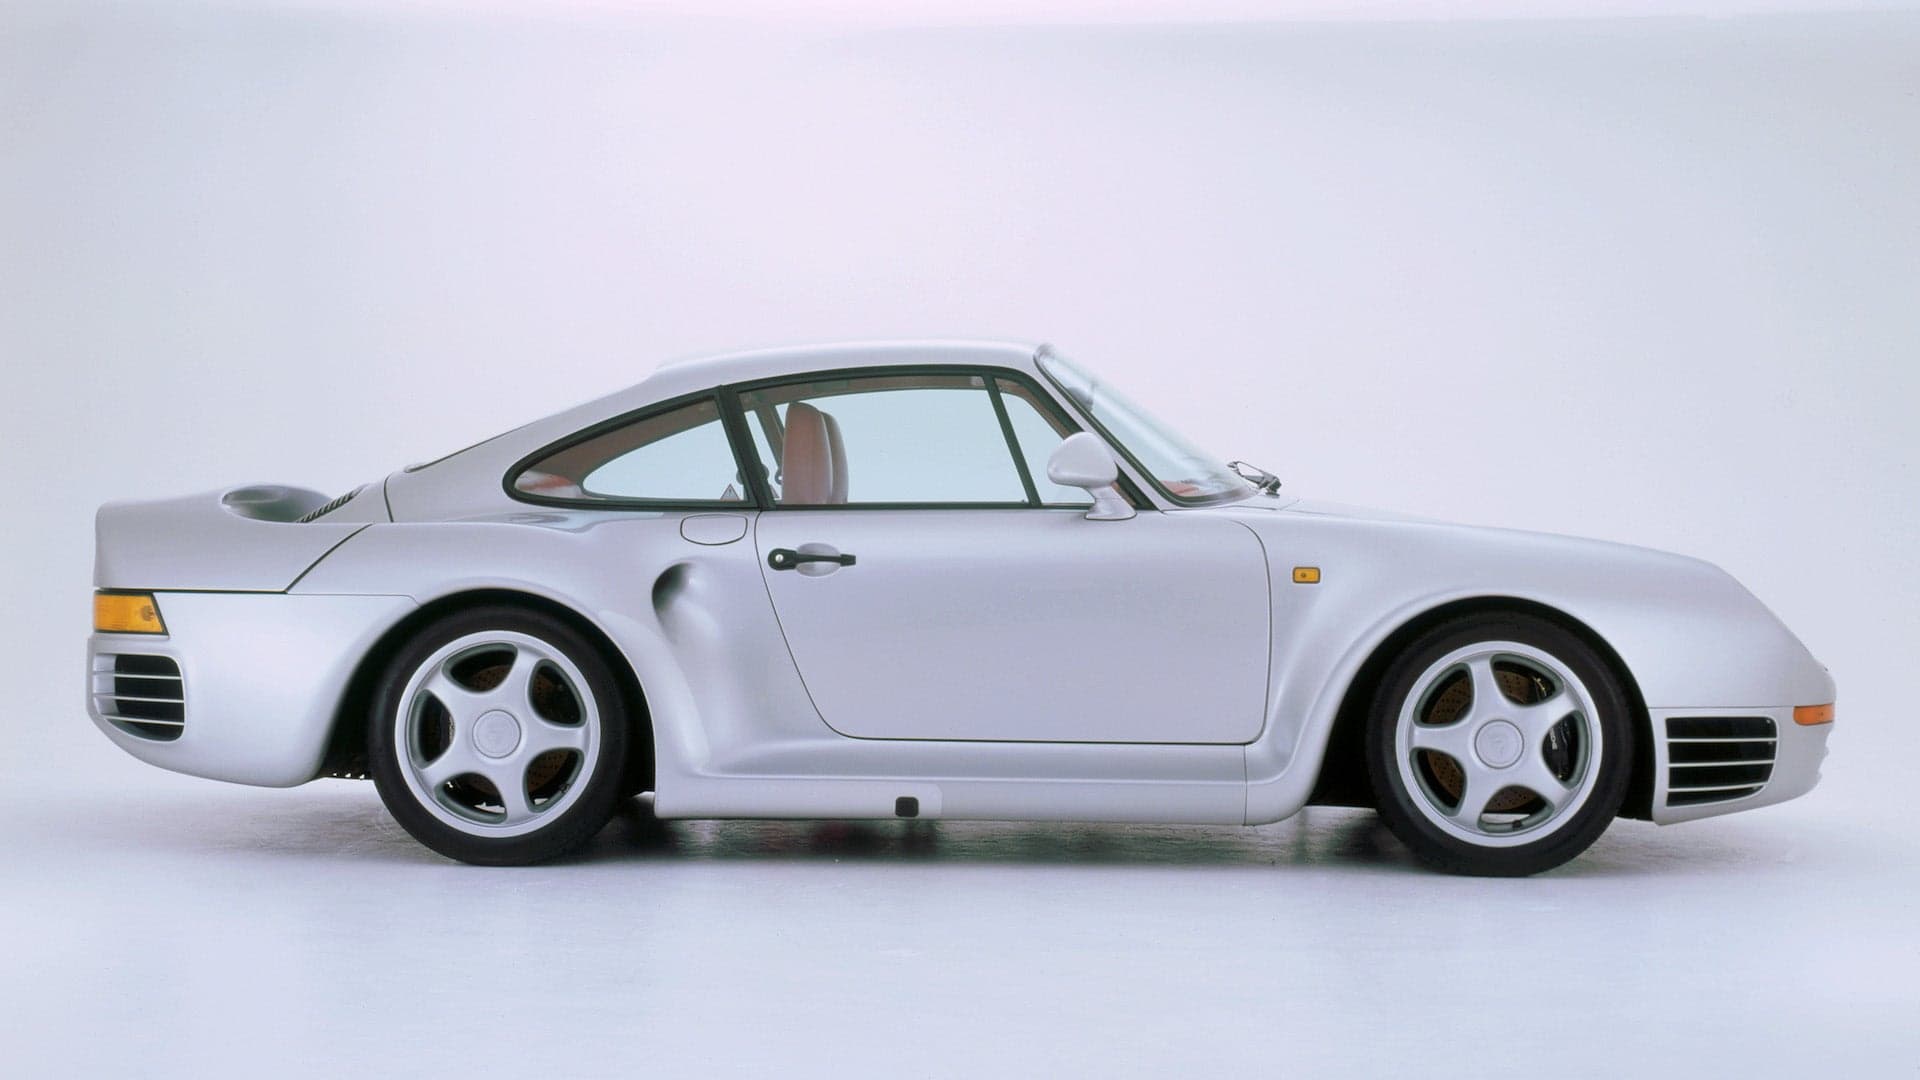 The Amped-Up Porsche 959SC From Canepa Will Set You Back $750,000